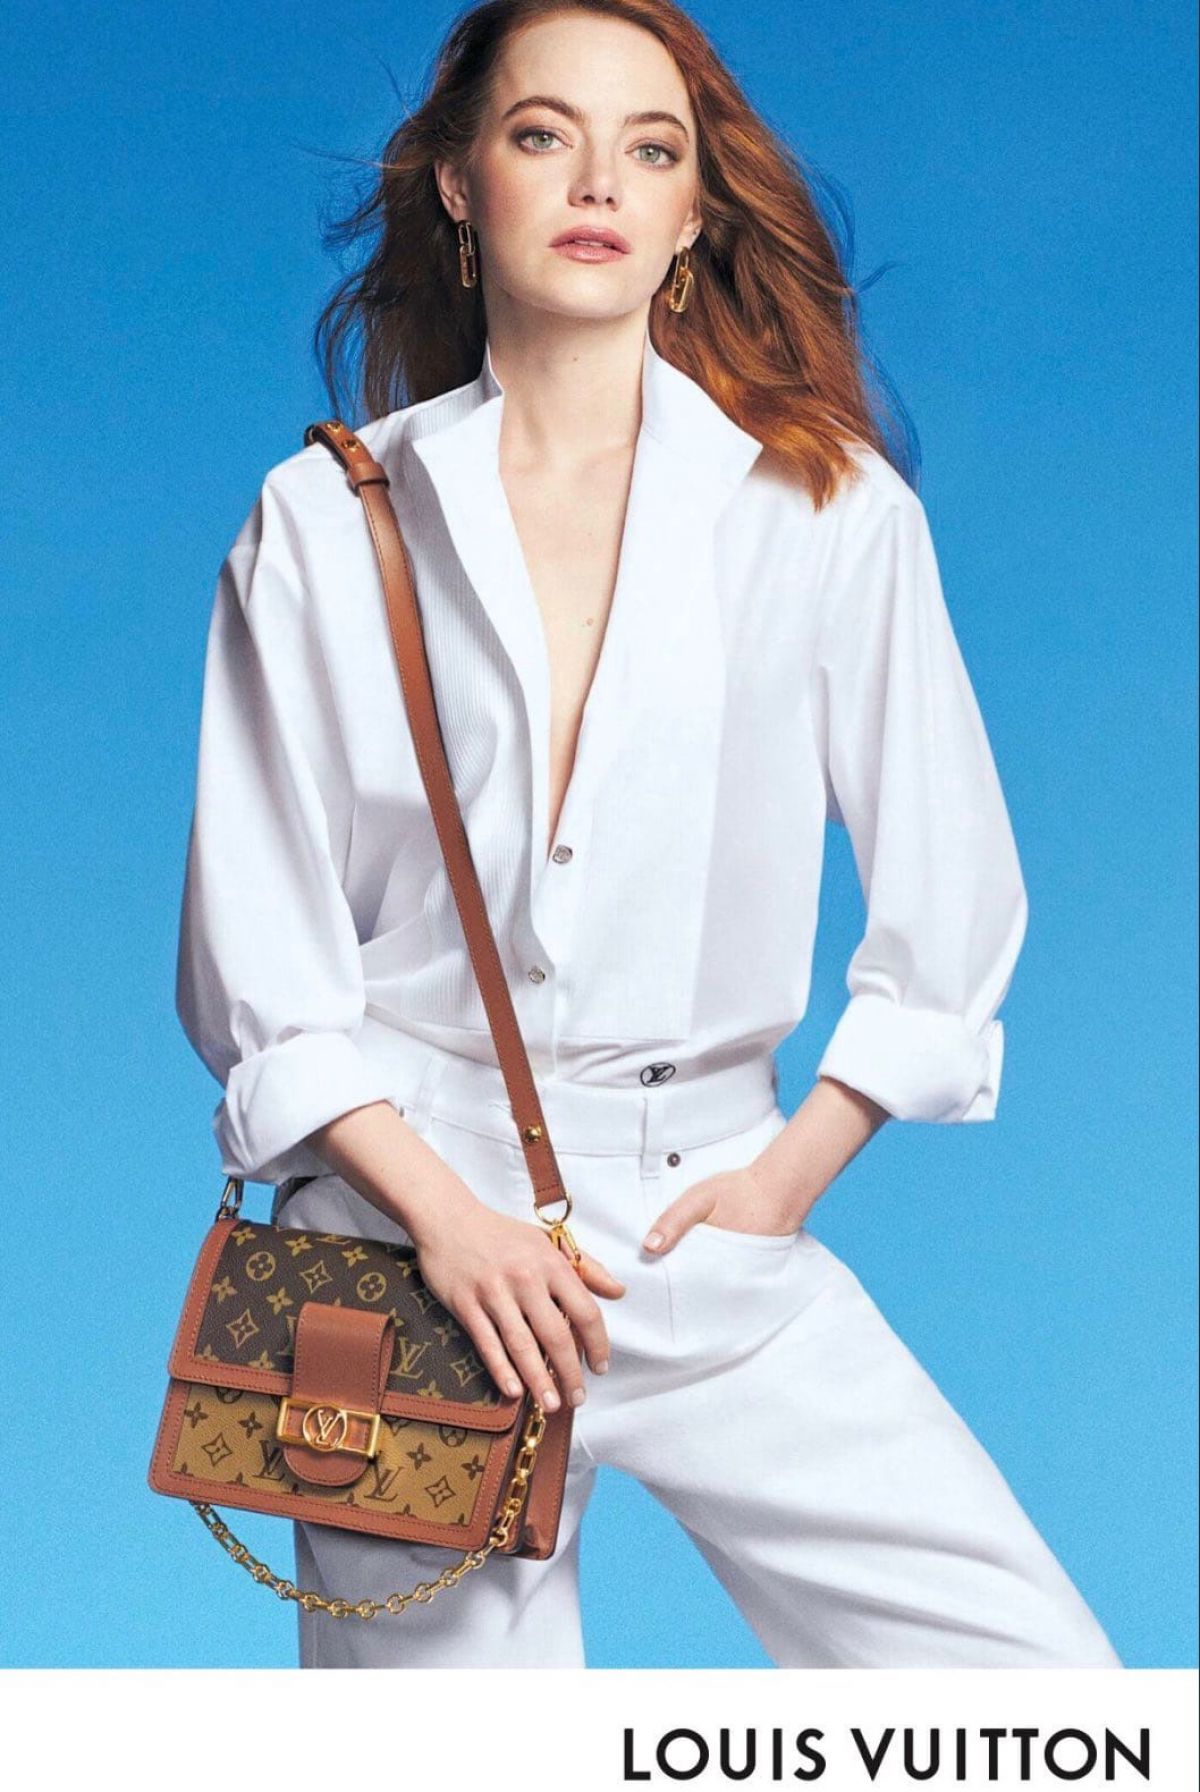 Emma Stone Is Cradling Her Bag Like a Baby in This Louis Vuitton Campaign,  and Honestly, We Can See Why